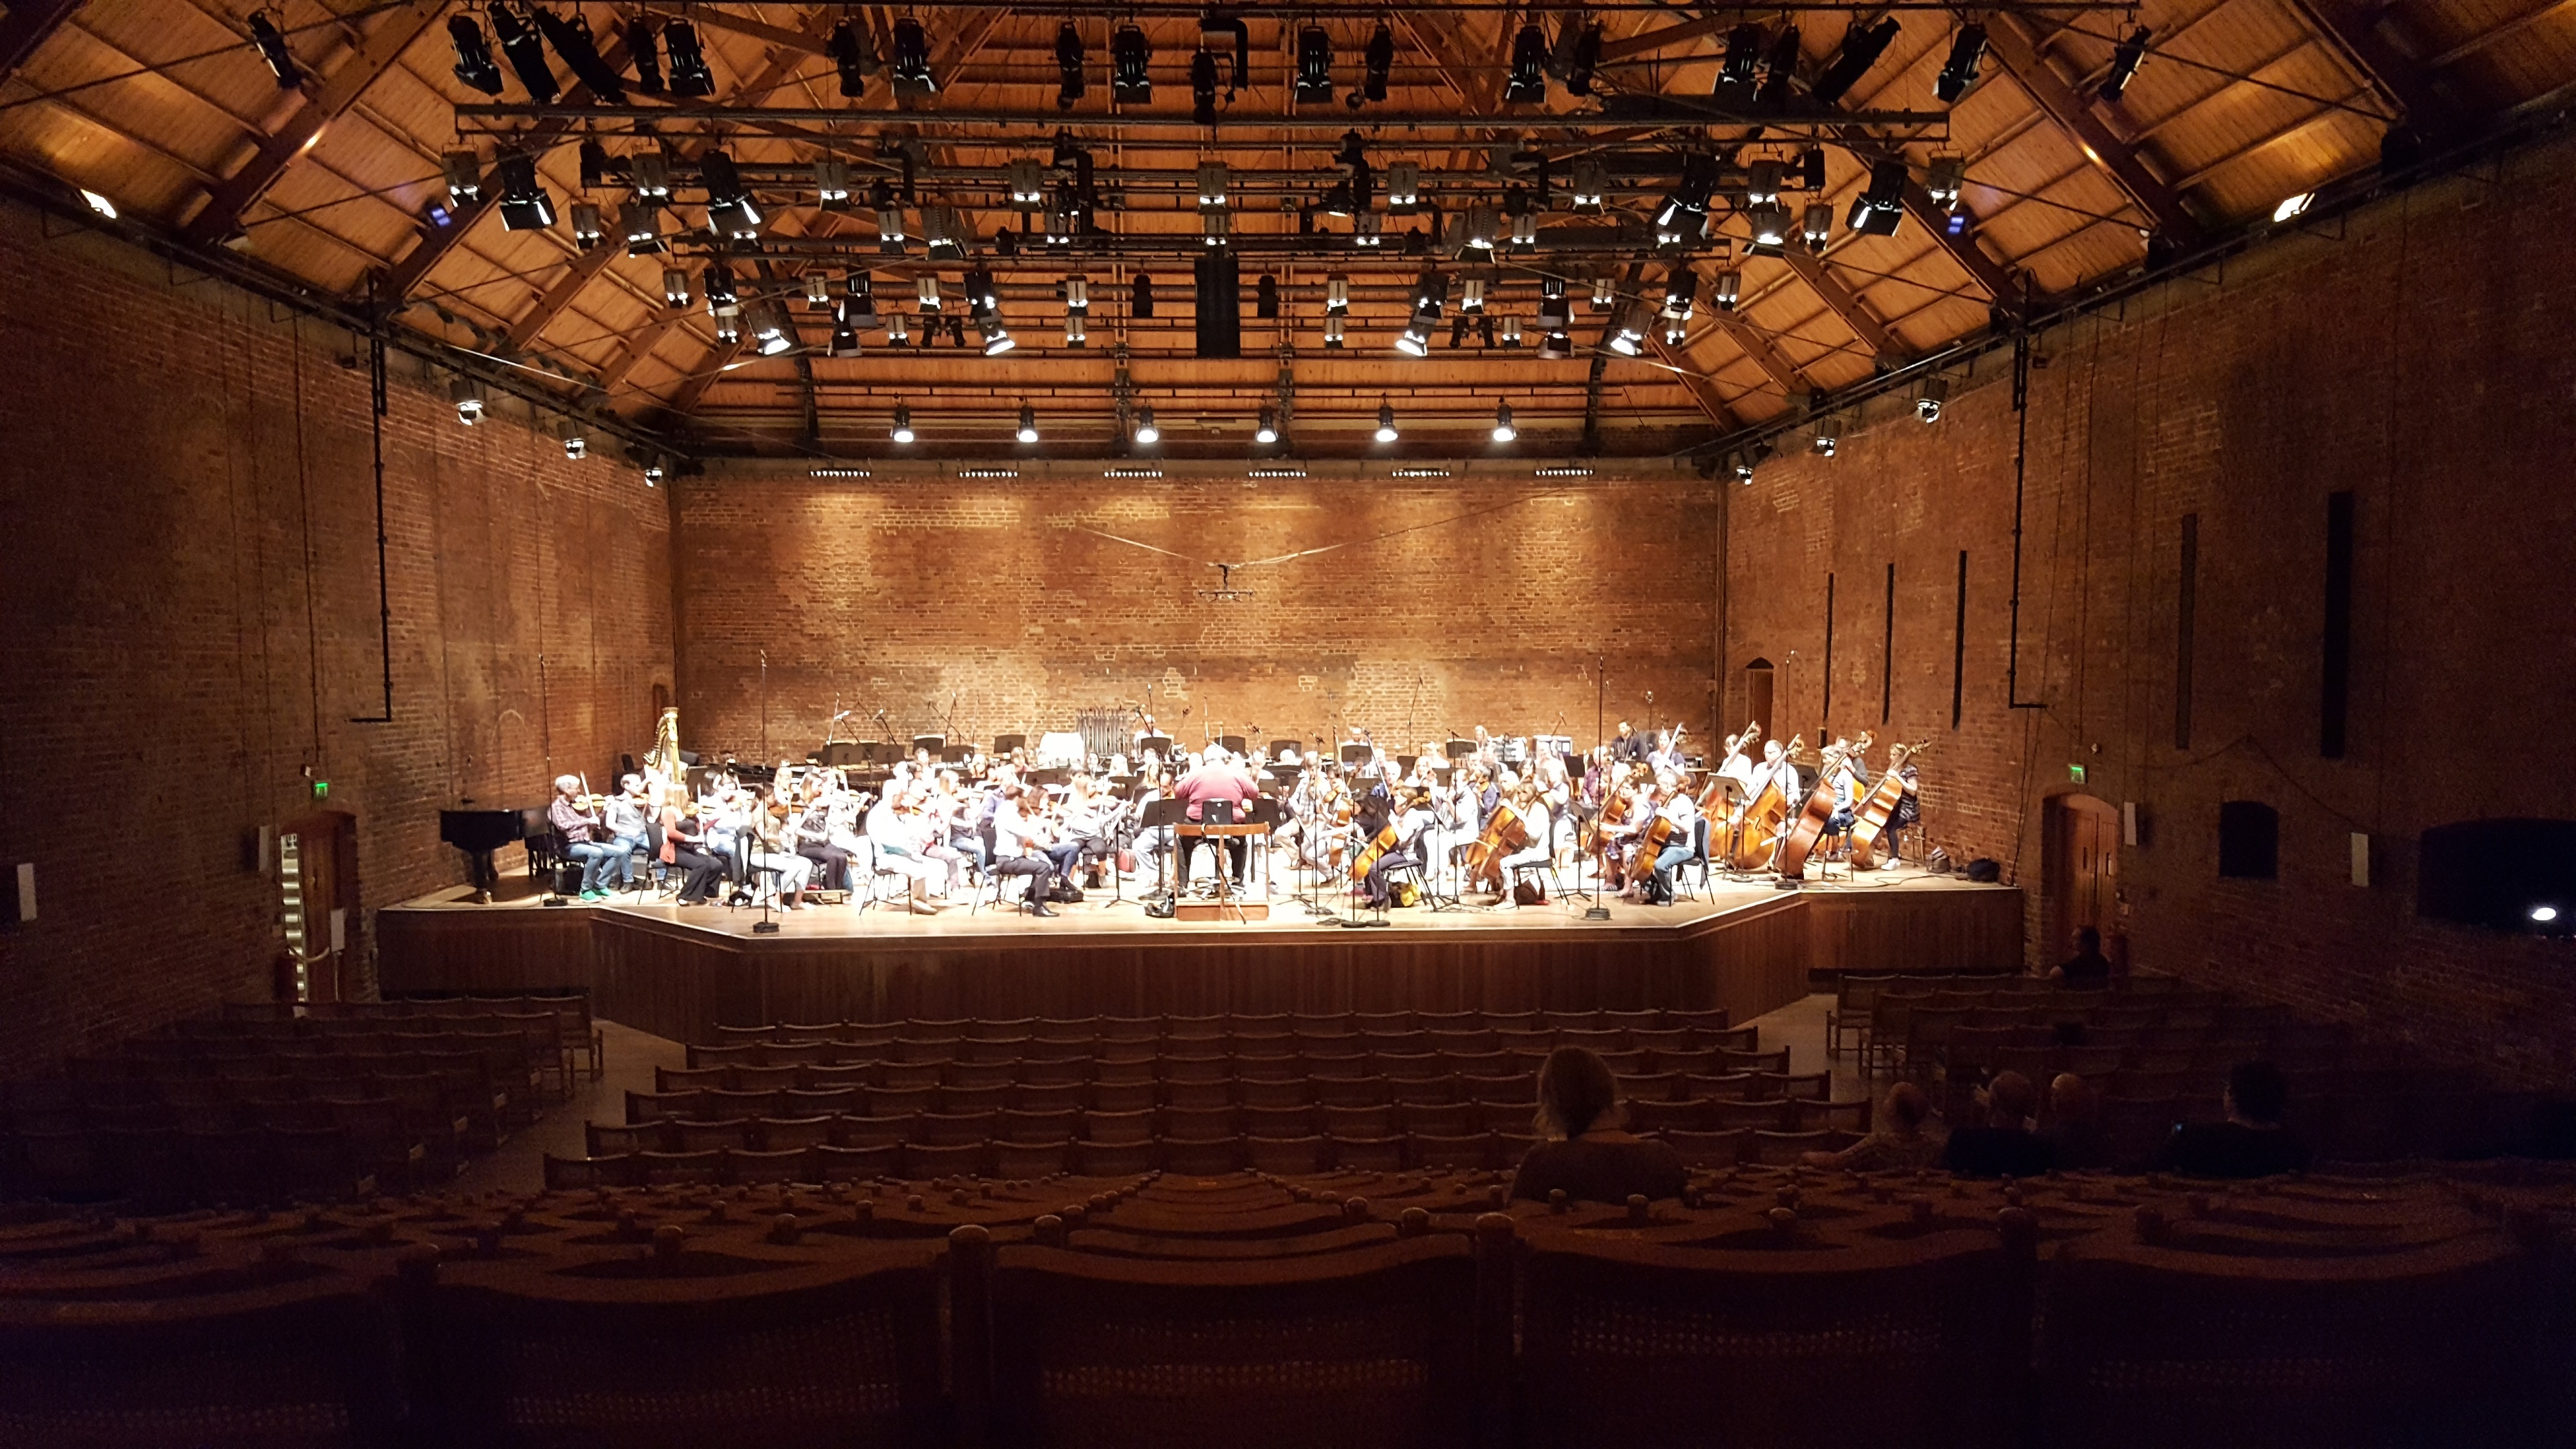 BBC Symphony Orchestra rehearsing Music for a Great City at Snape Maltings